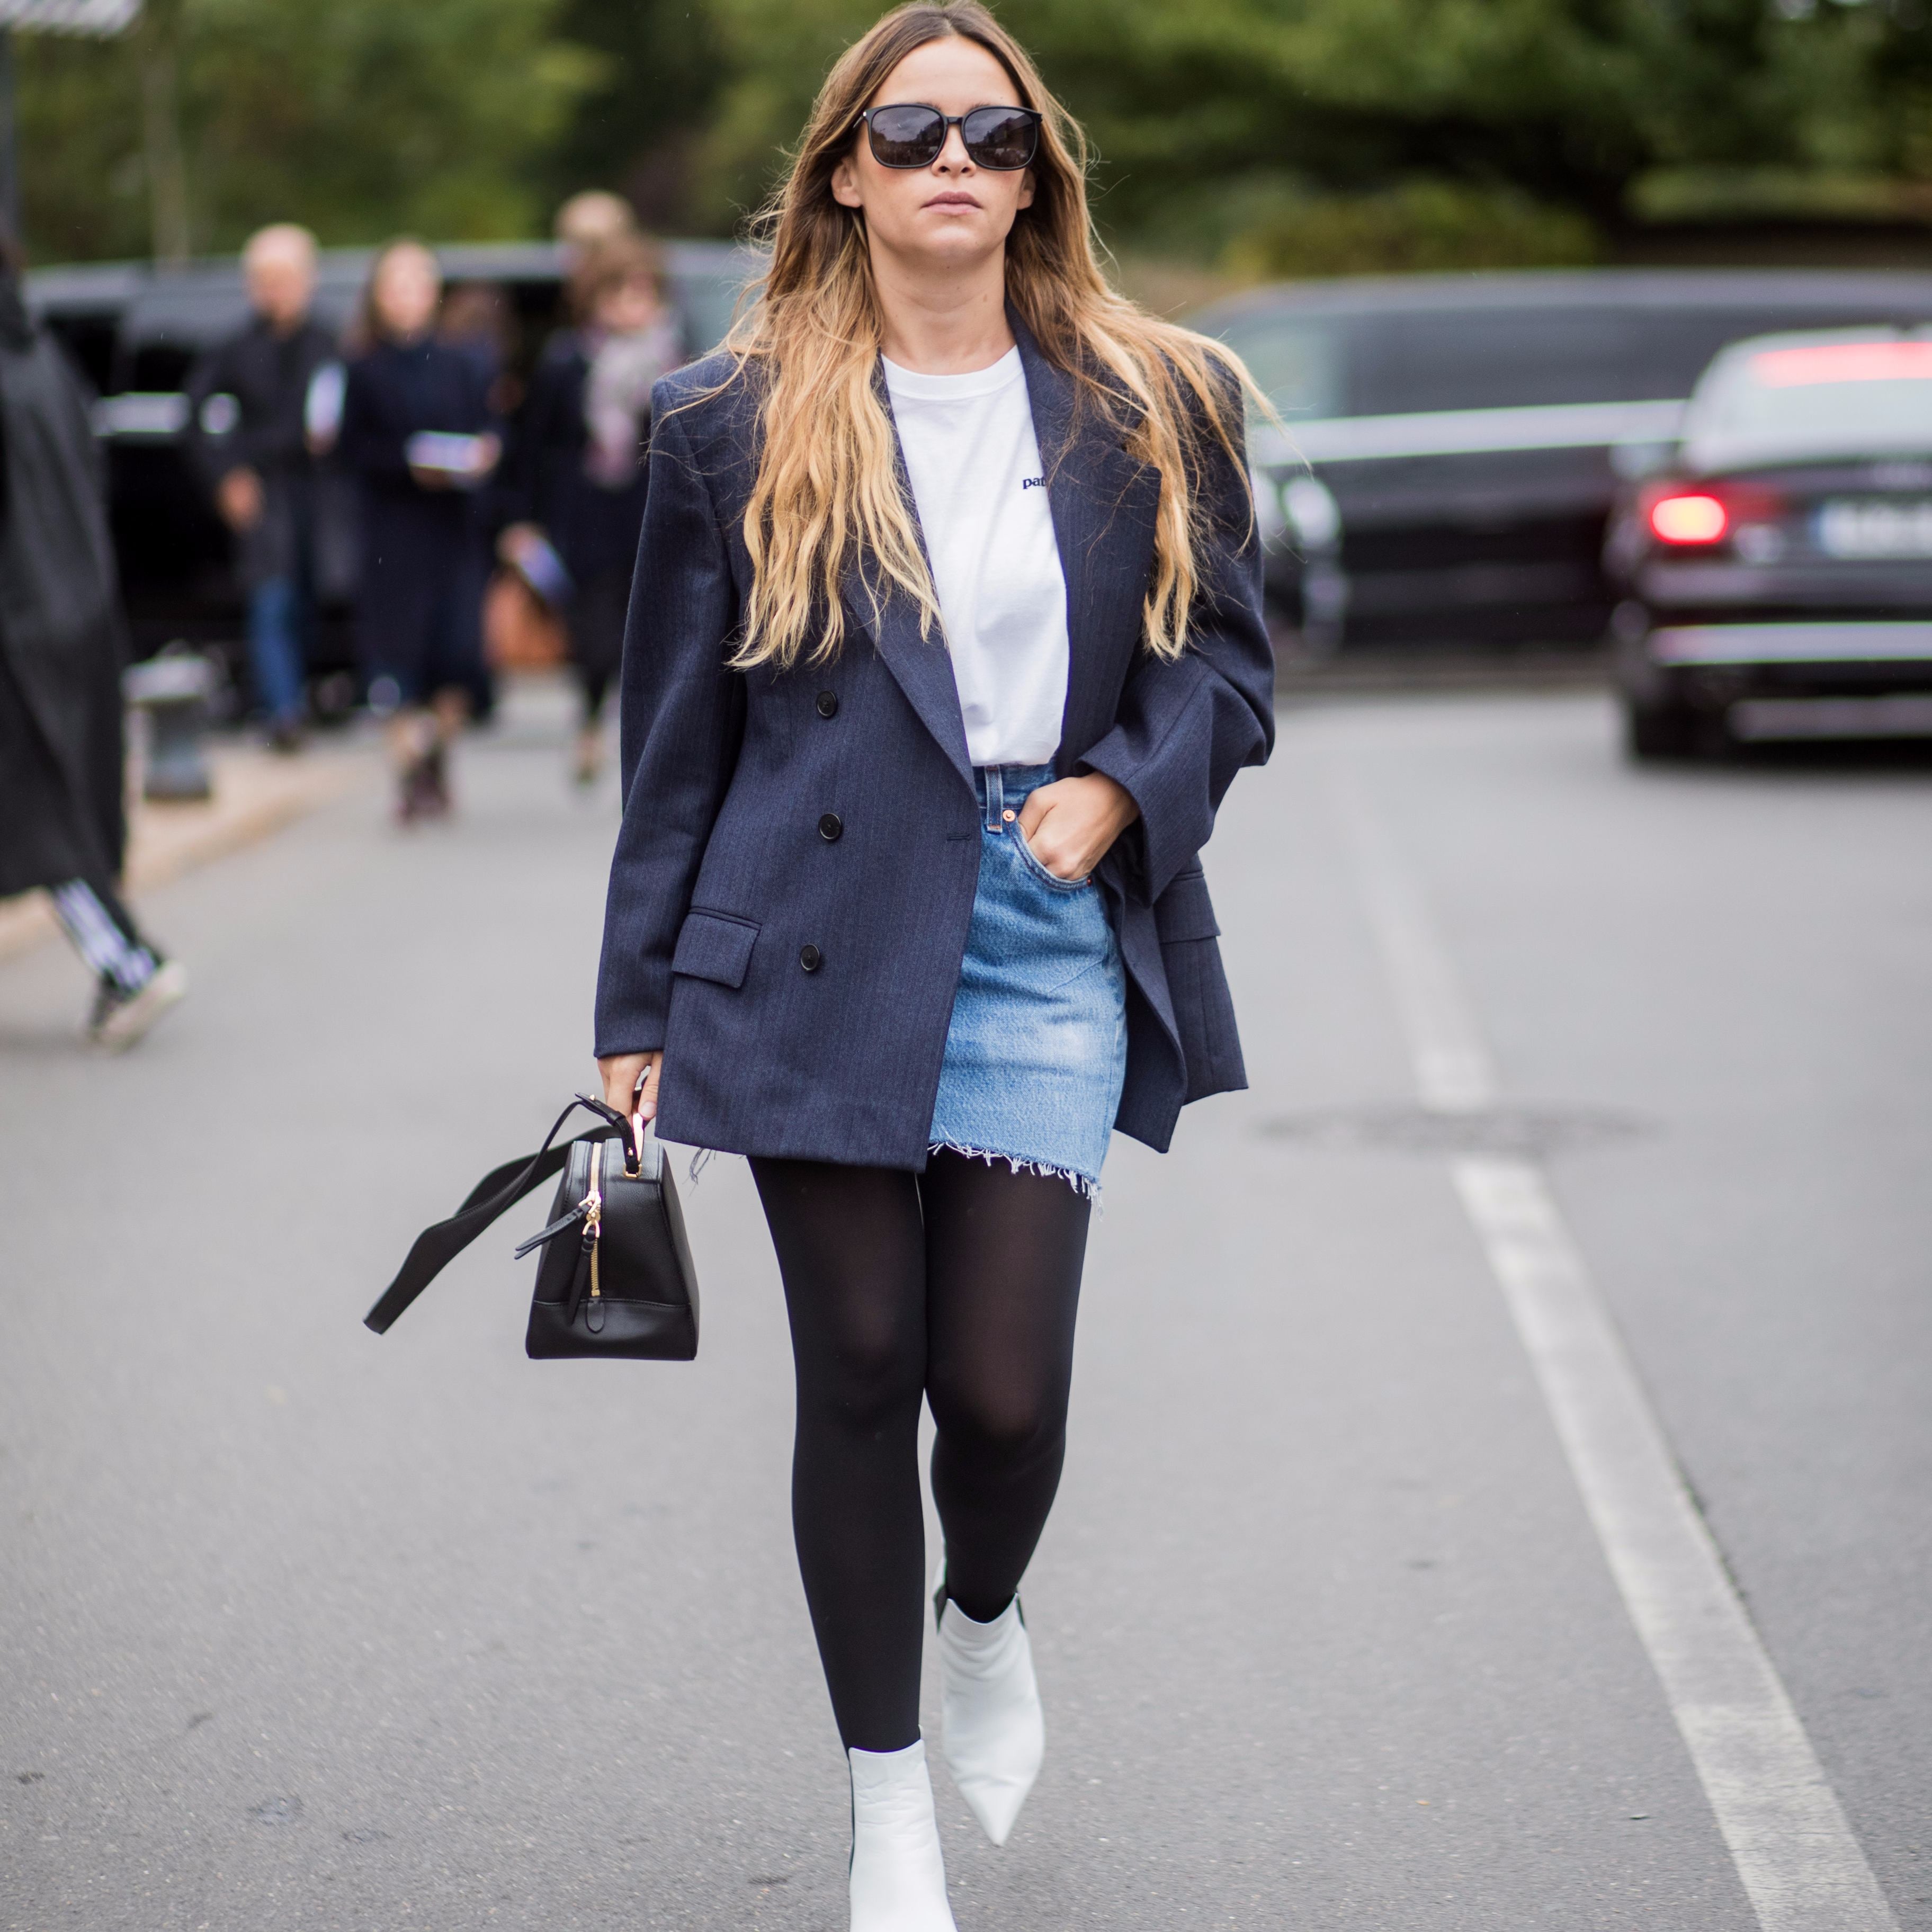 What Color Tights Should You Wear with a Navy Skirt?